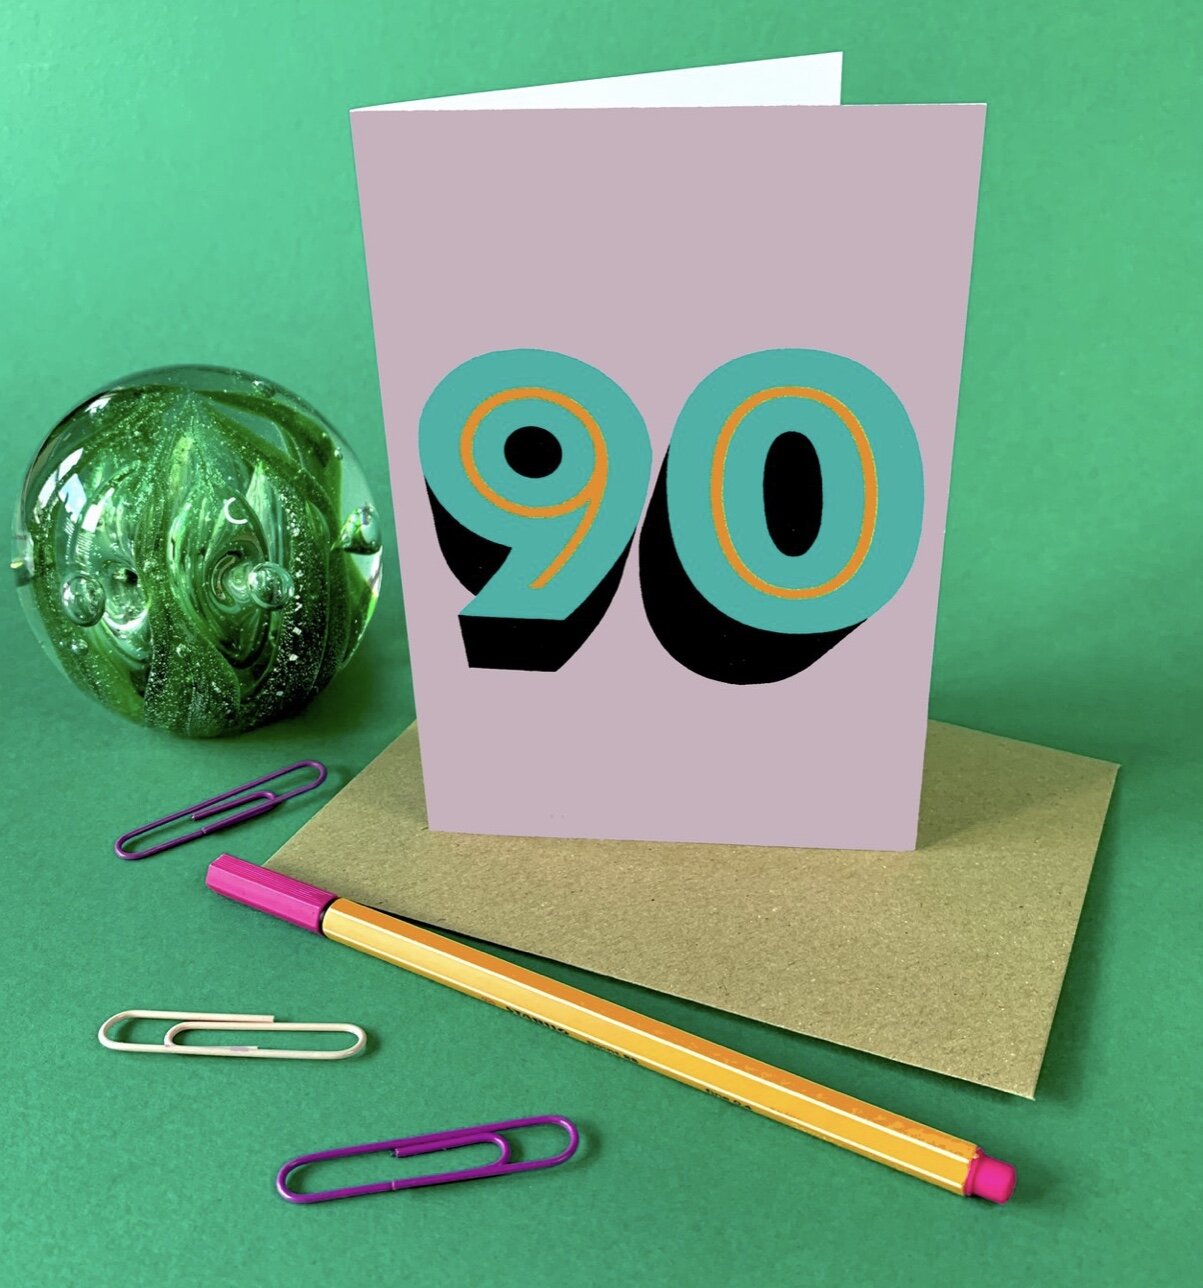 90 | CARD BY MAX MADE ME DO IT